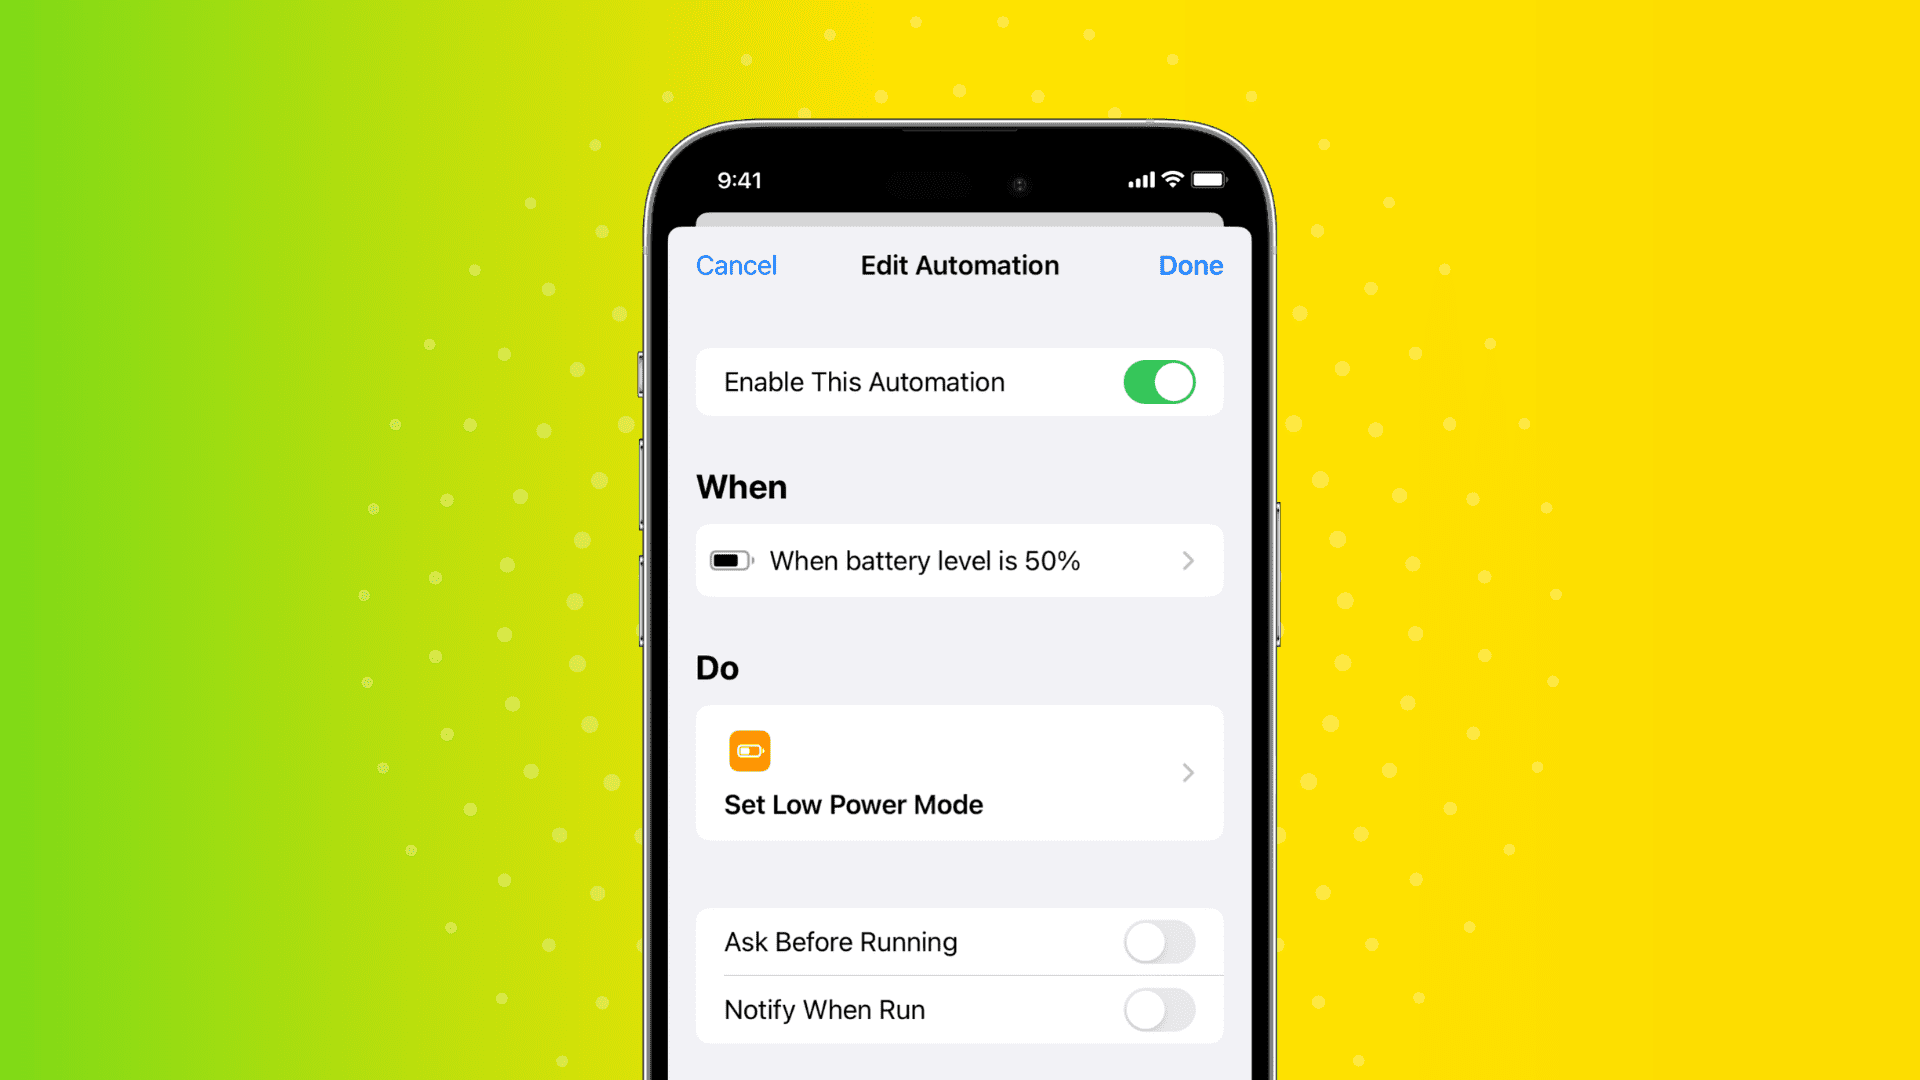 iPhone mockup showing Shortcuts app automation that enables Low Power Mode automatically at any set battery percentage